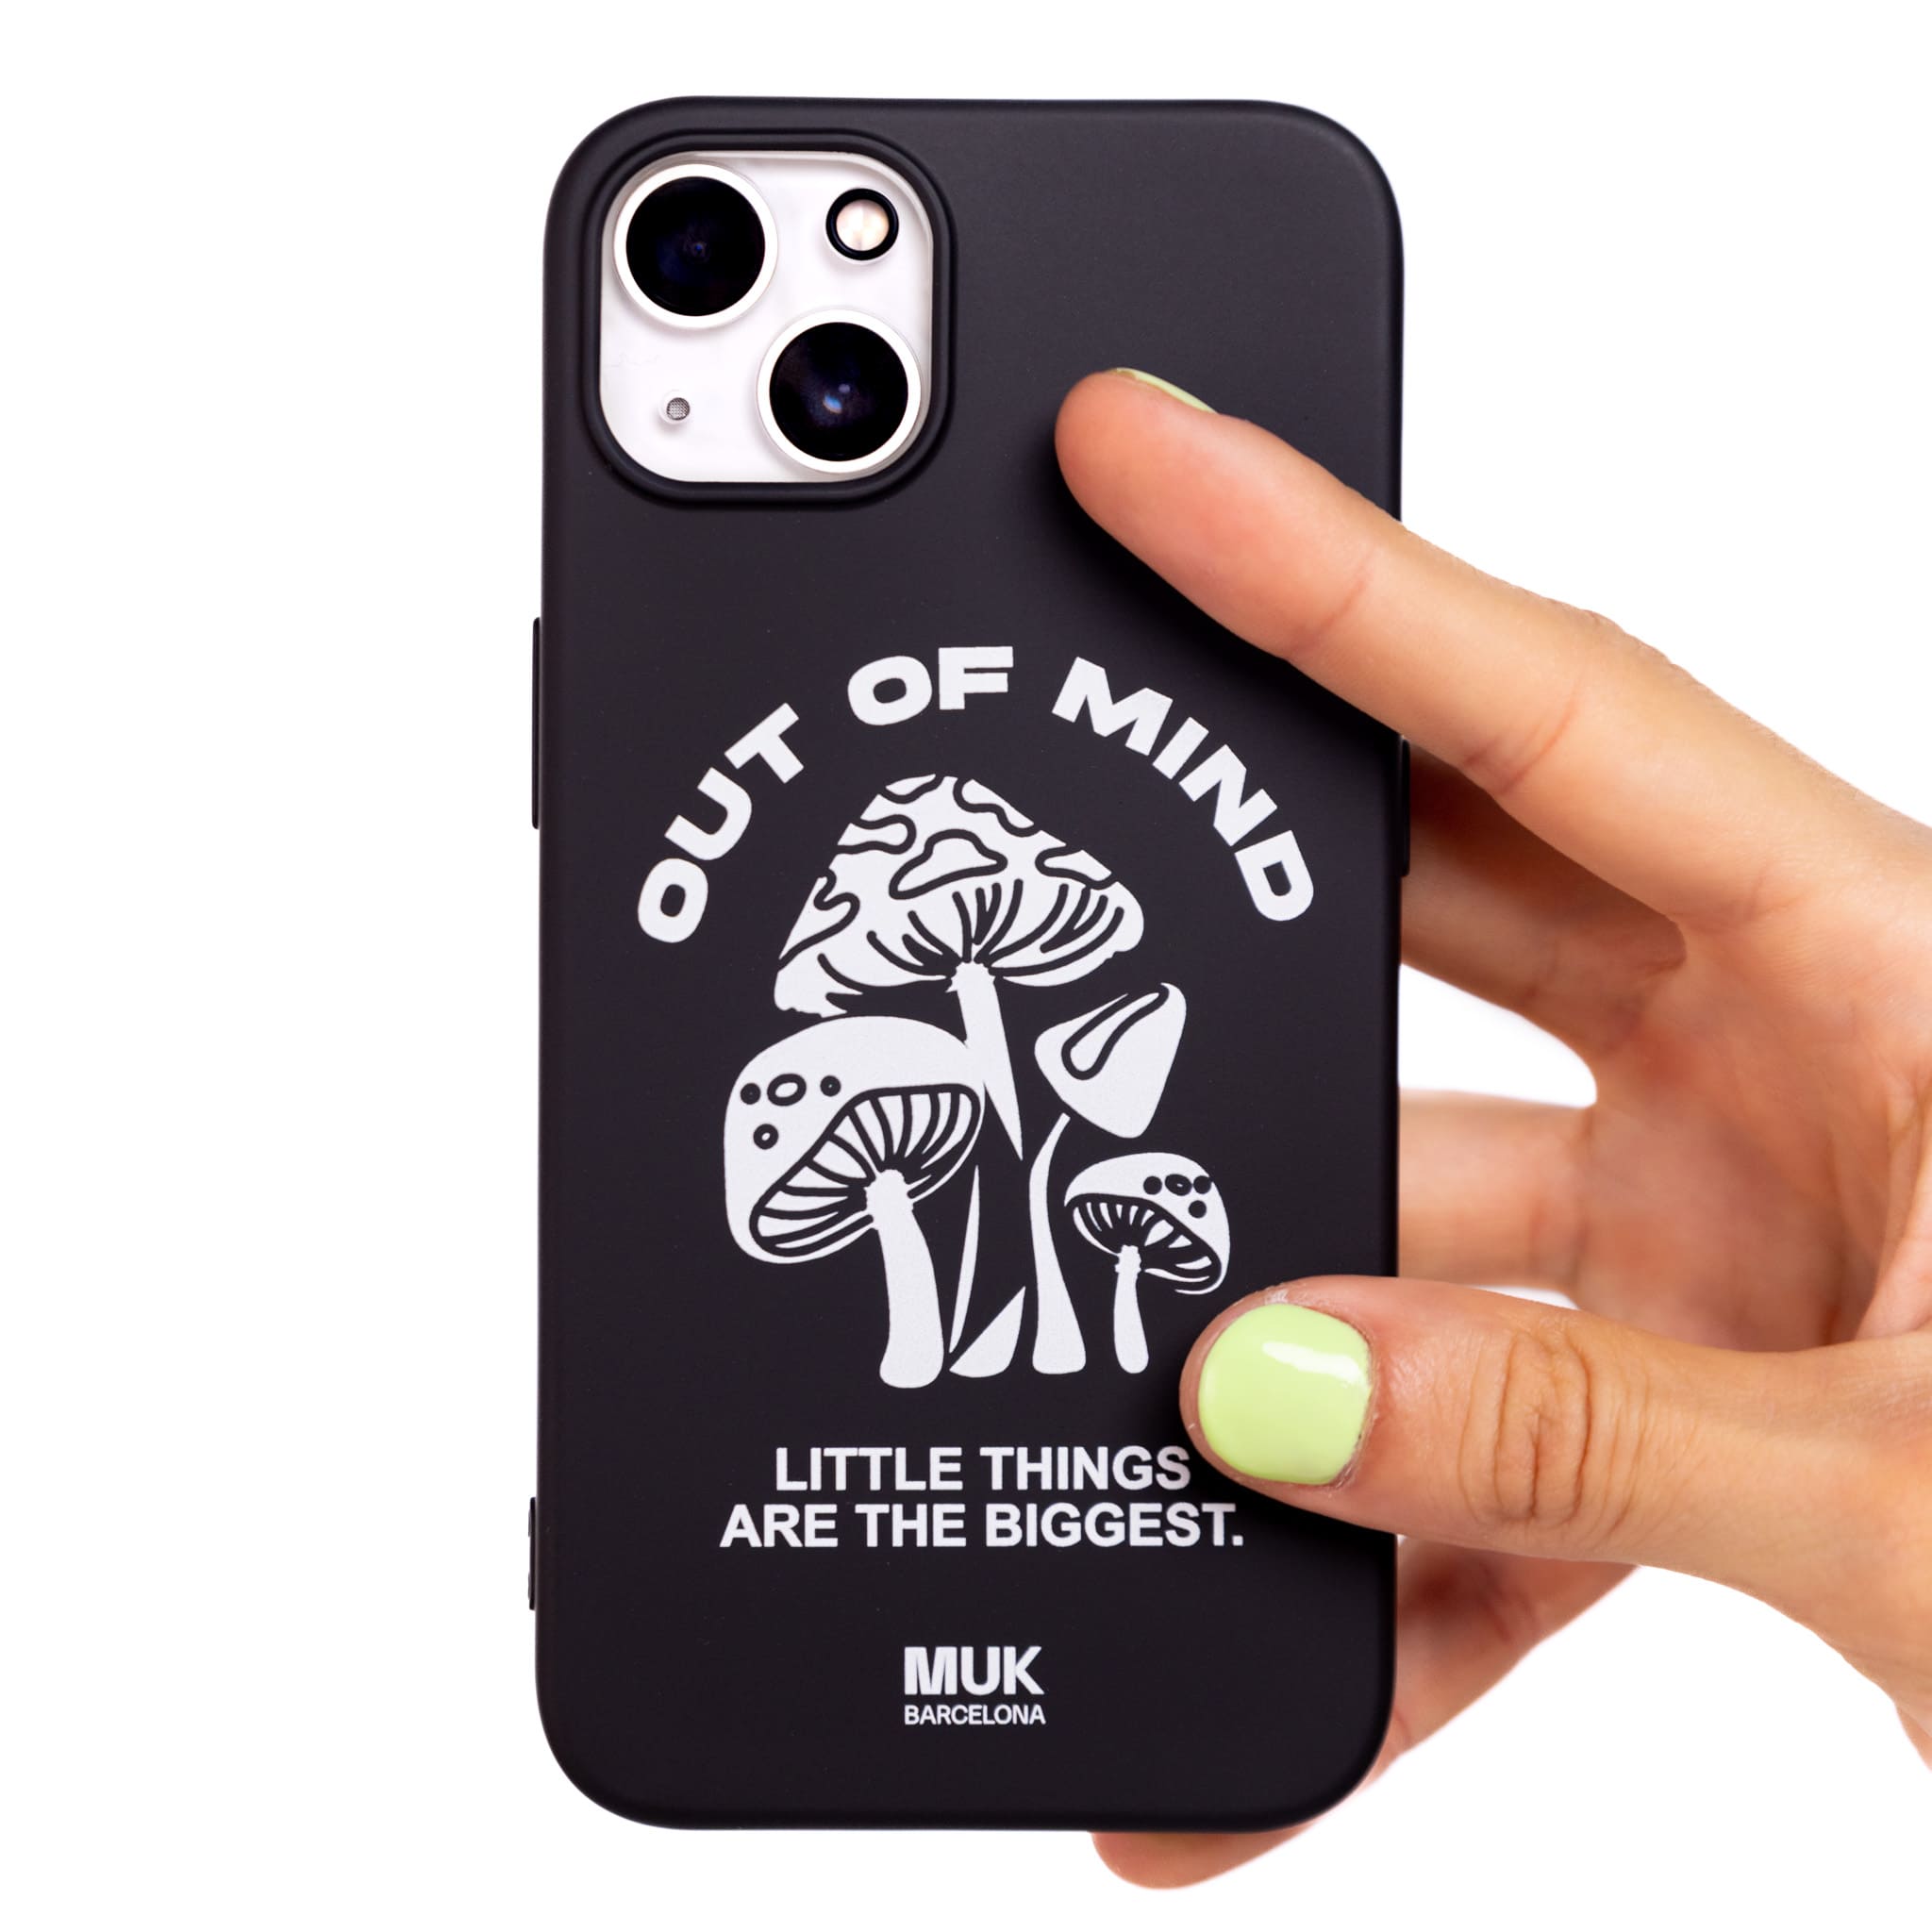 Black TPU  case with mushroom design and phrase "out of mind" in white.
